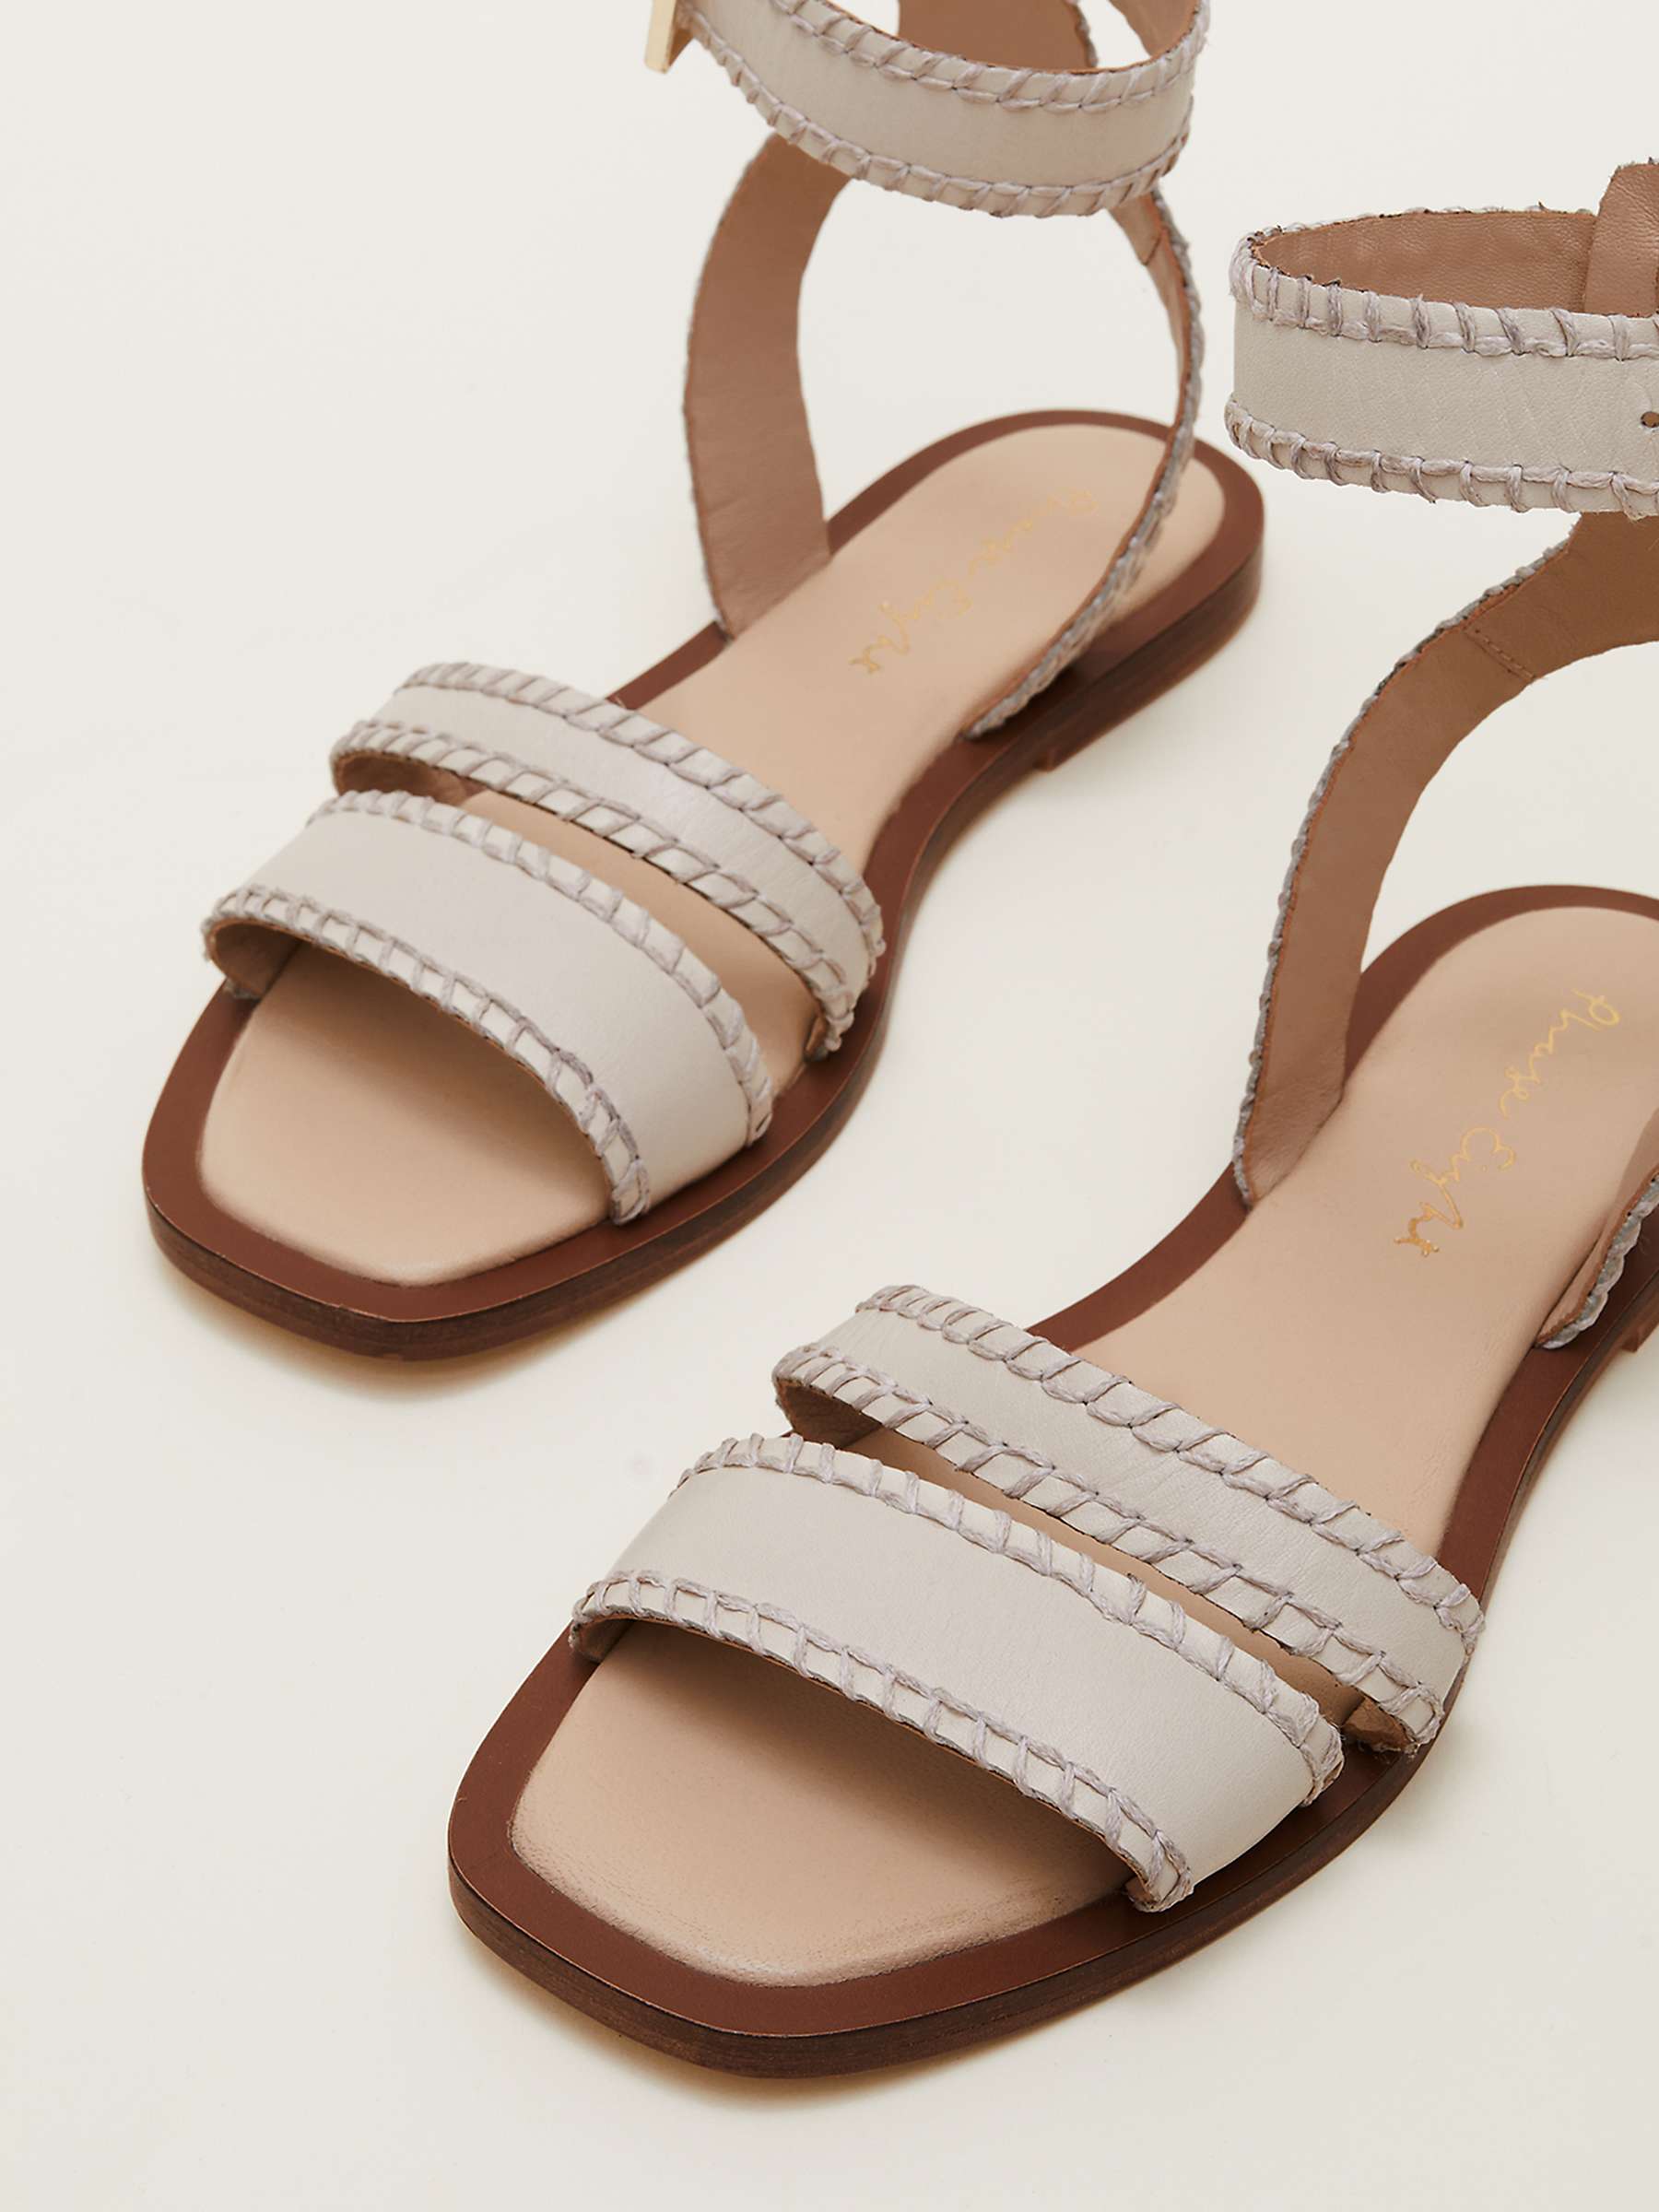 Buy Phase Eight Leather Double Strap Flat Sandals Online at johnlewis.com